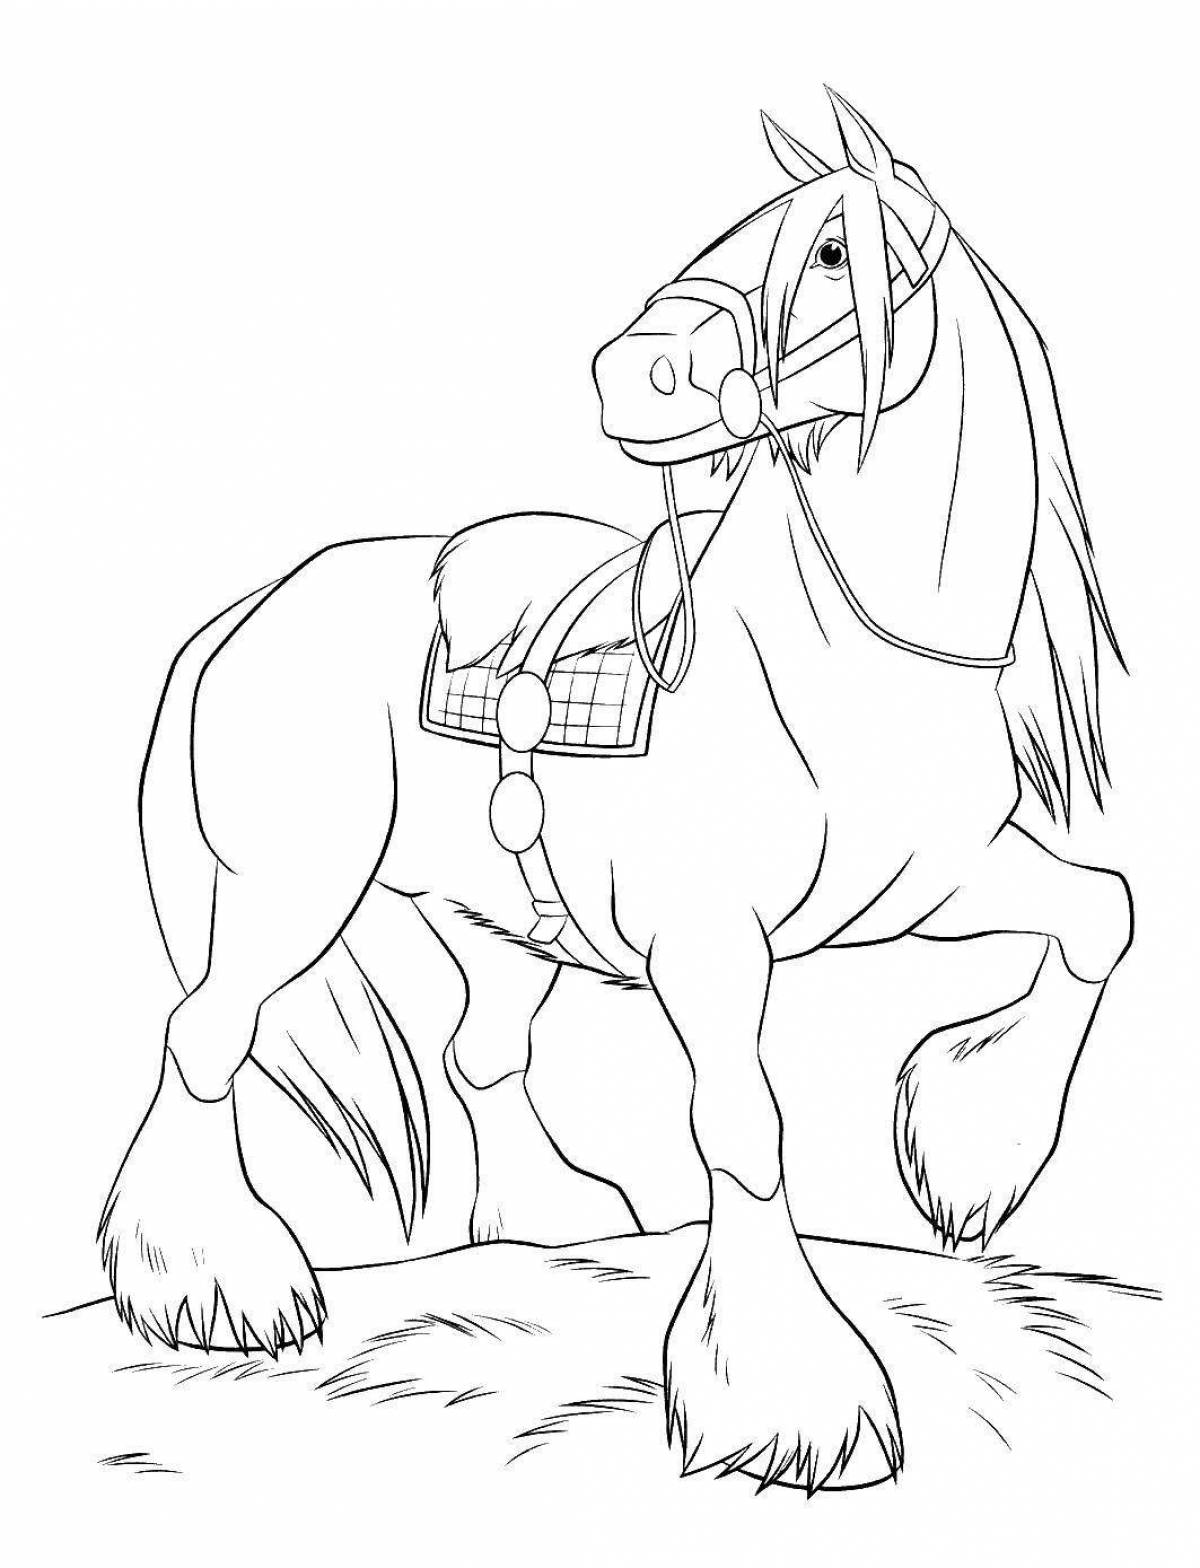 Exquisitely painted spirit horse coloring page